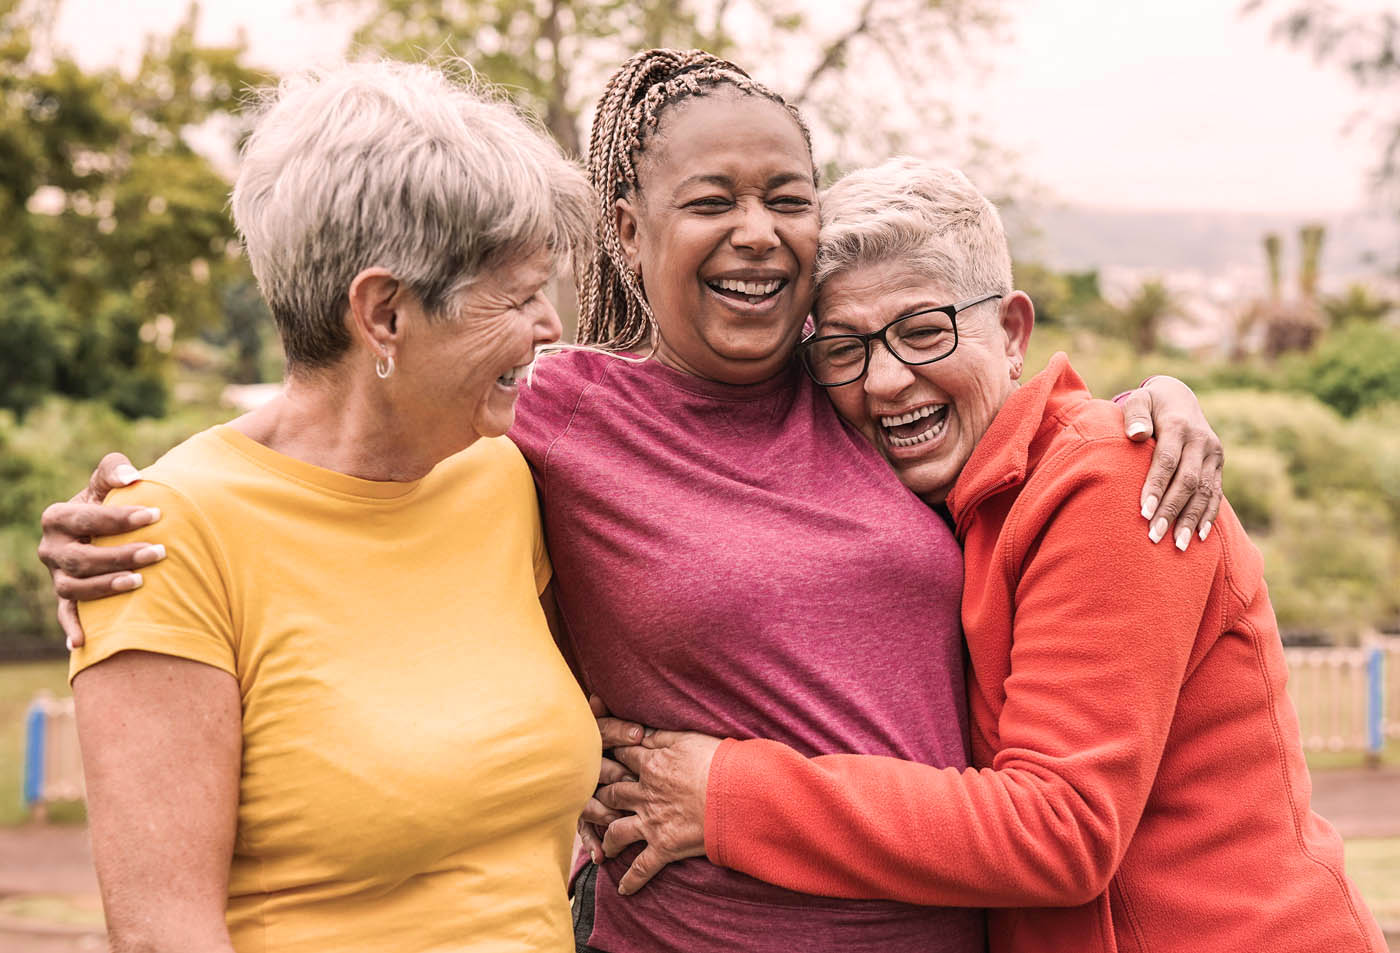 A group of elderly women laughing and hugging each other - discover Denver multiple sclerosis pain treatment today.